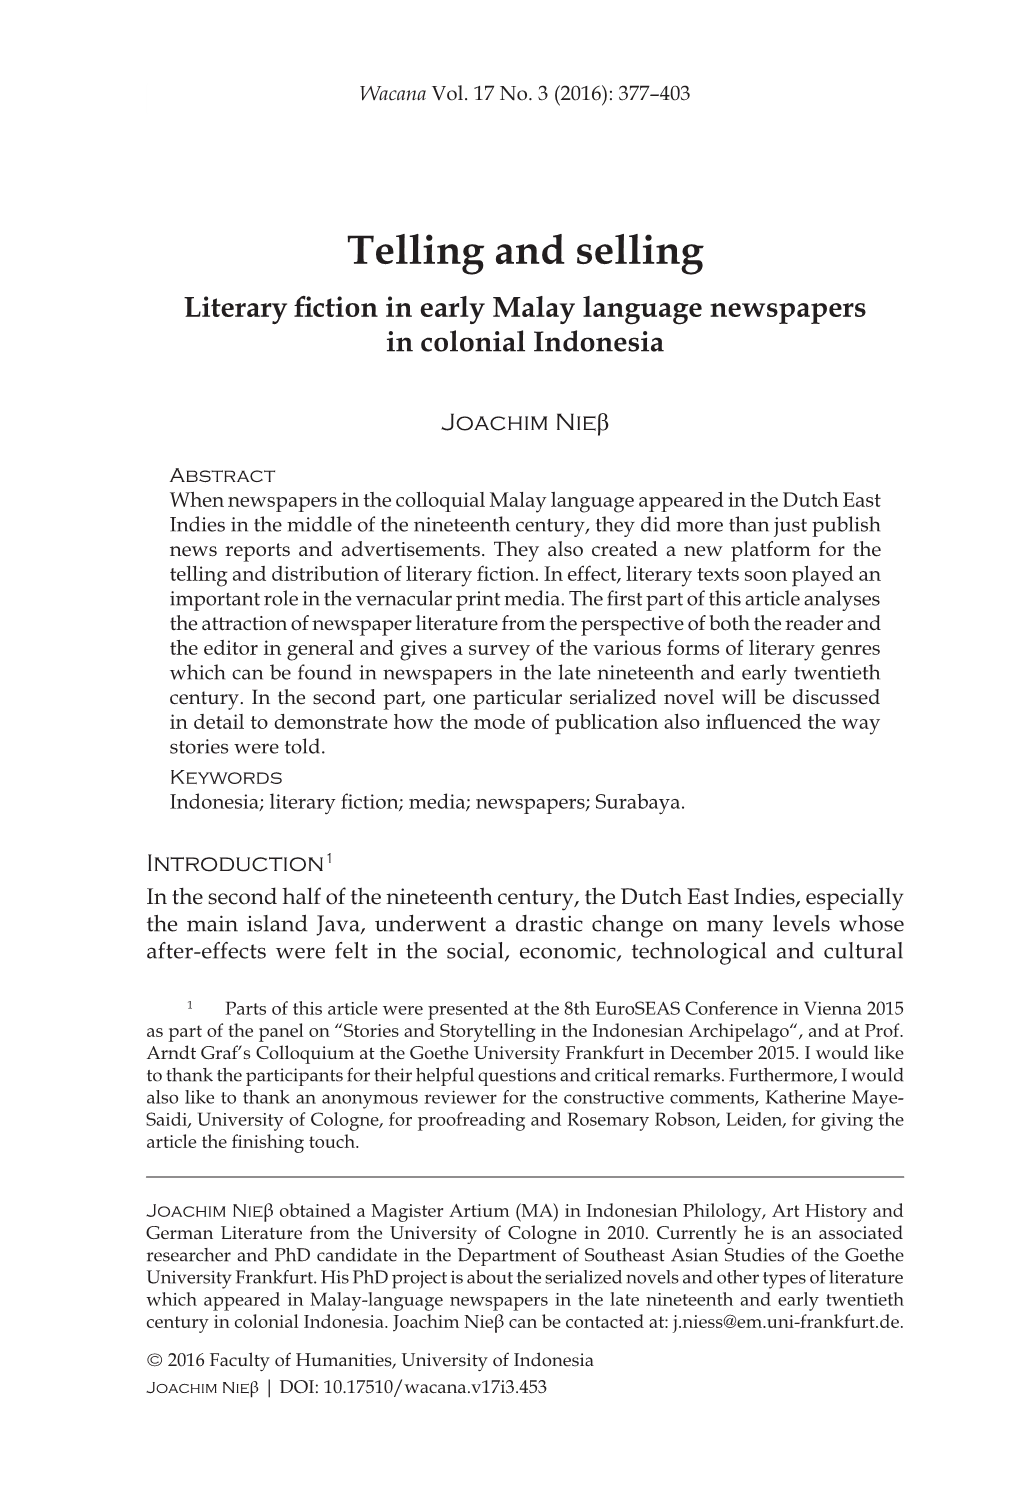 Telling and Selling Literary Fiction in Early Malay Language Newspapers in Colonial Indonesia